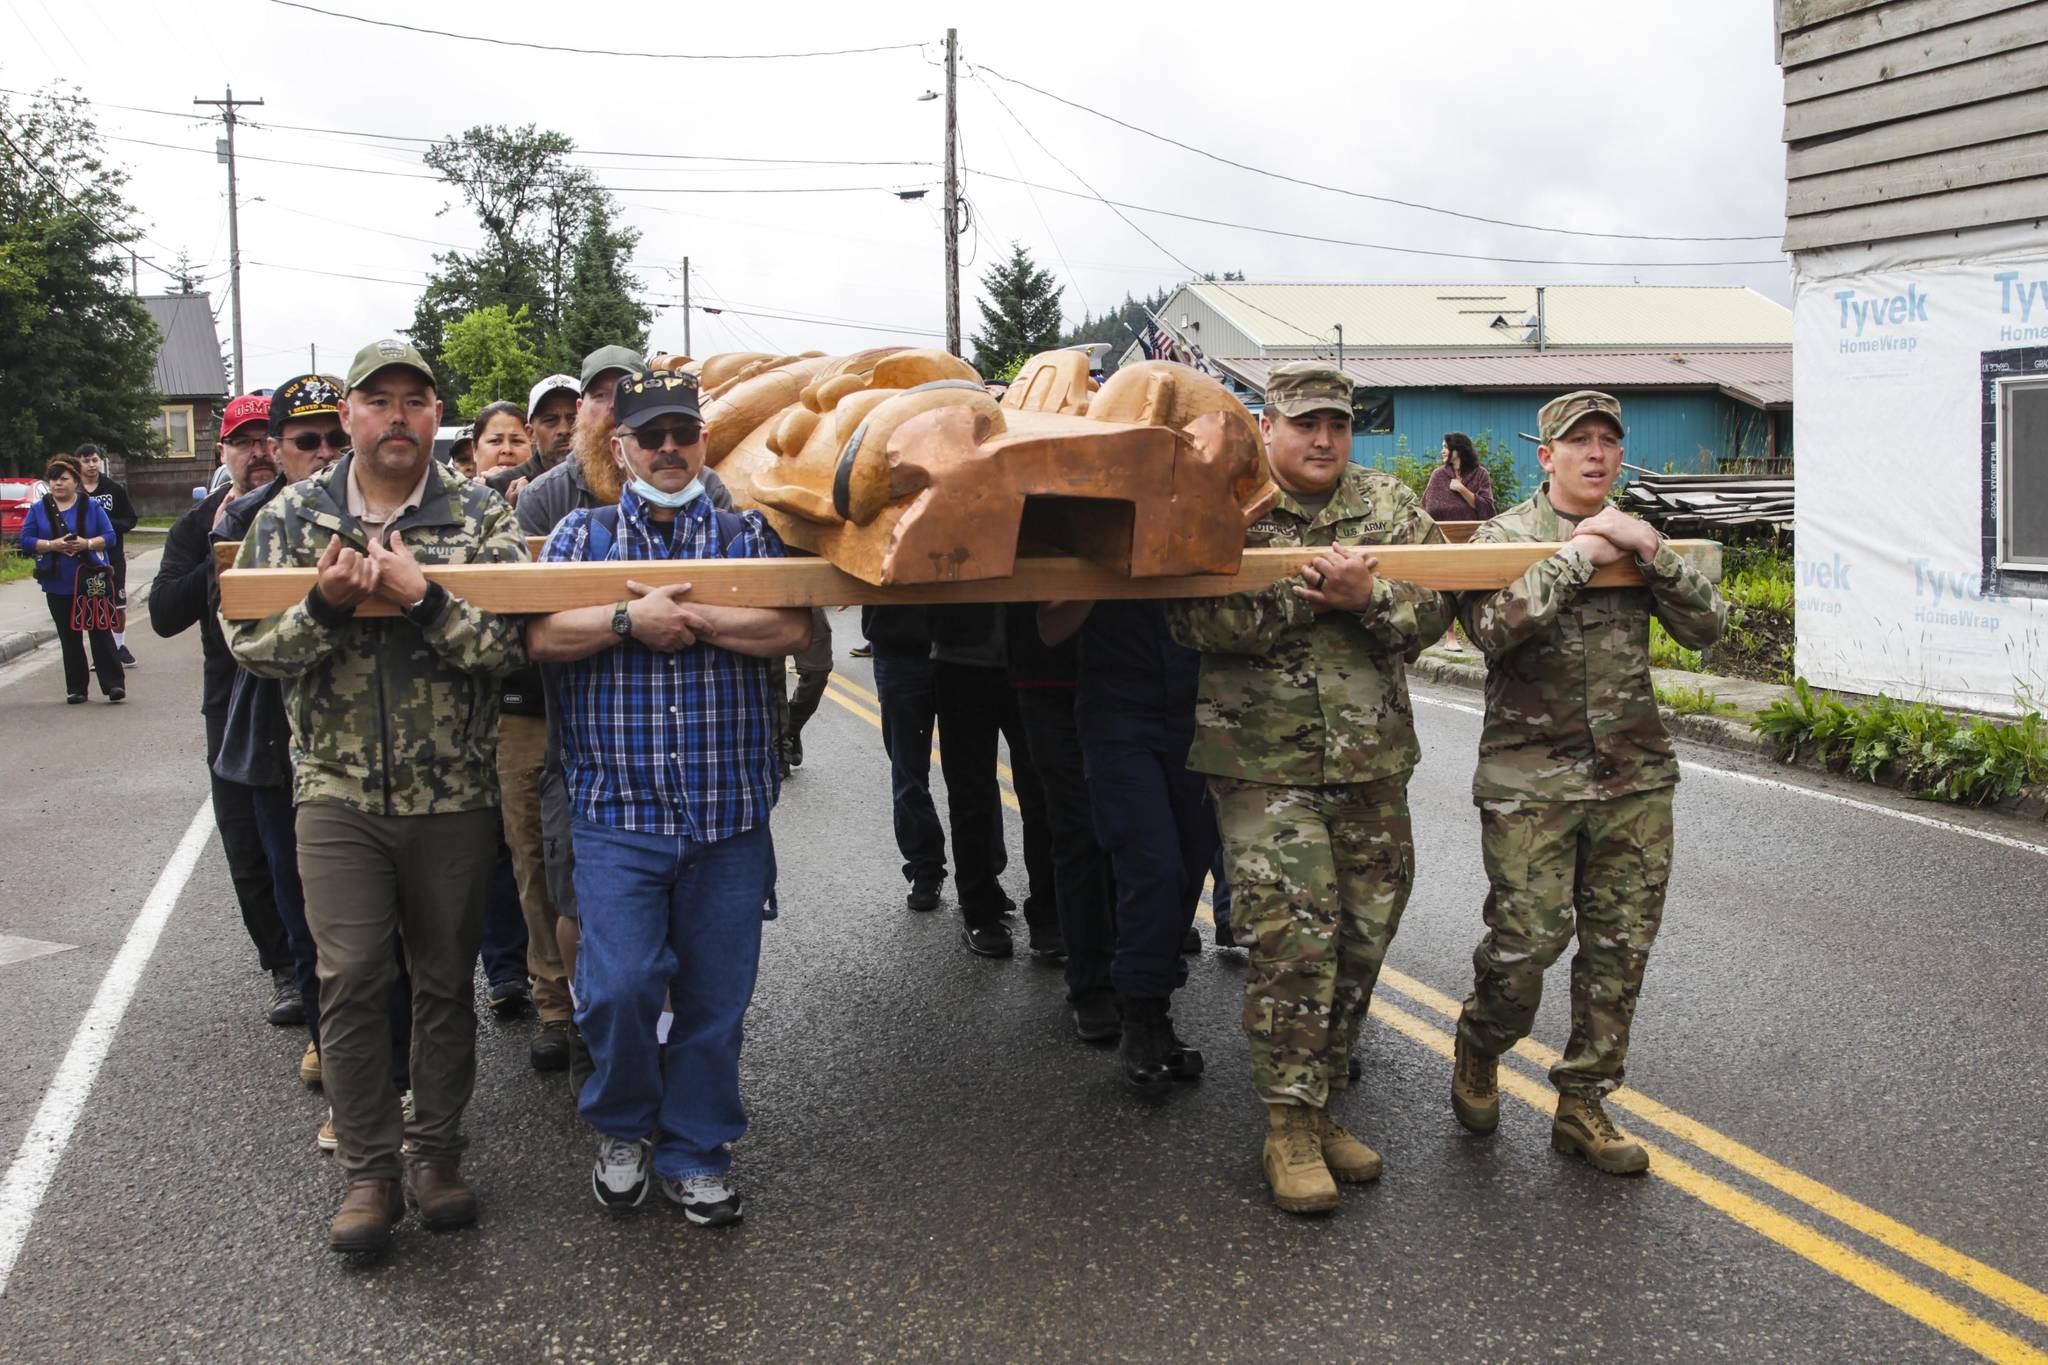 Veterans and active duty servicemembers carry the totem pole on July 24, 2021 as hundreds gathered in Hoonah for its raising. (Michael S. Lockett / Juneau Empire)